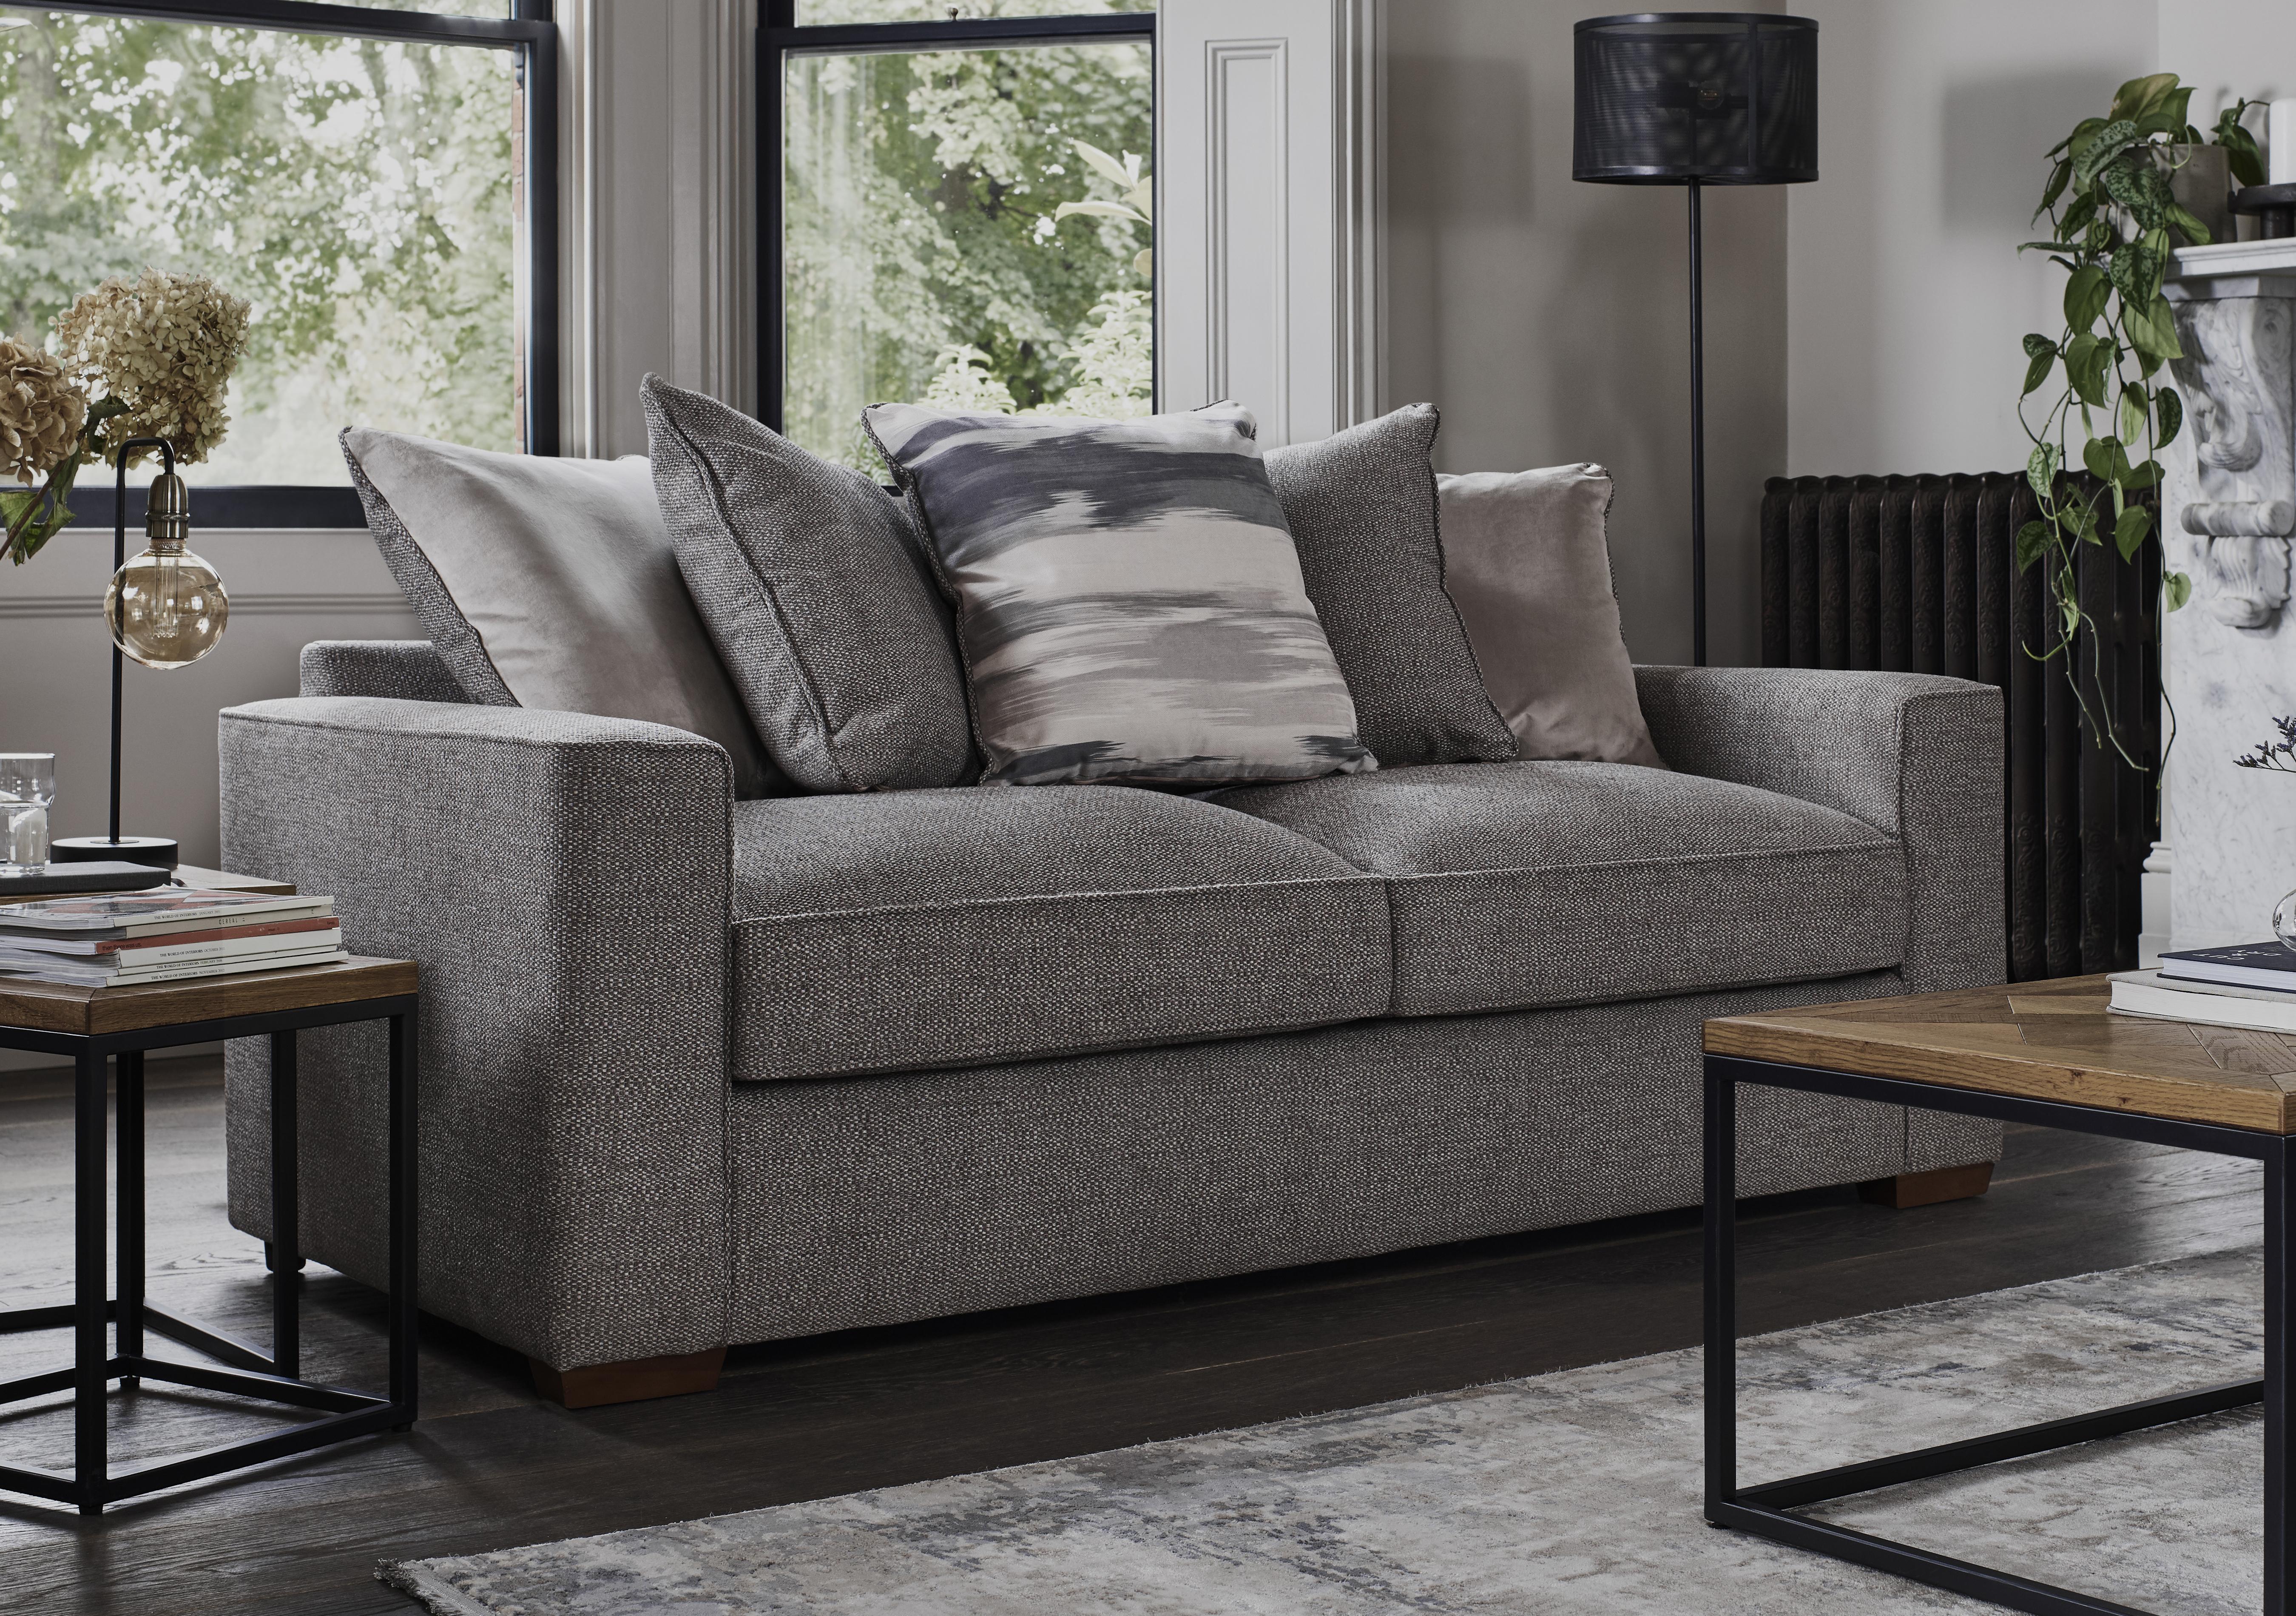 Cory 3 Seater Fabric Scatter Back Sofa in  on Furniture Village